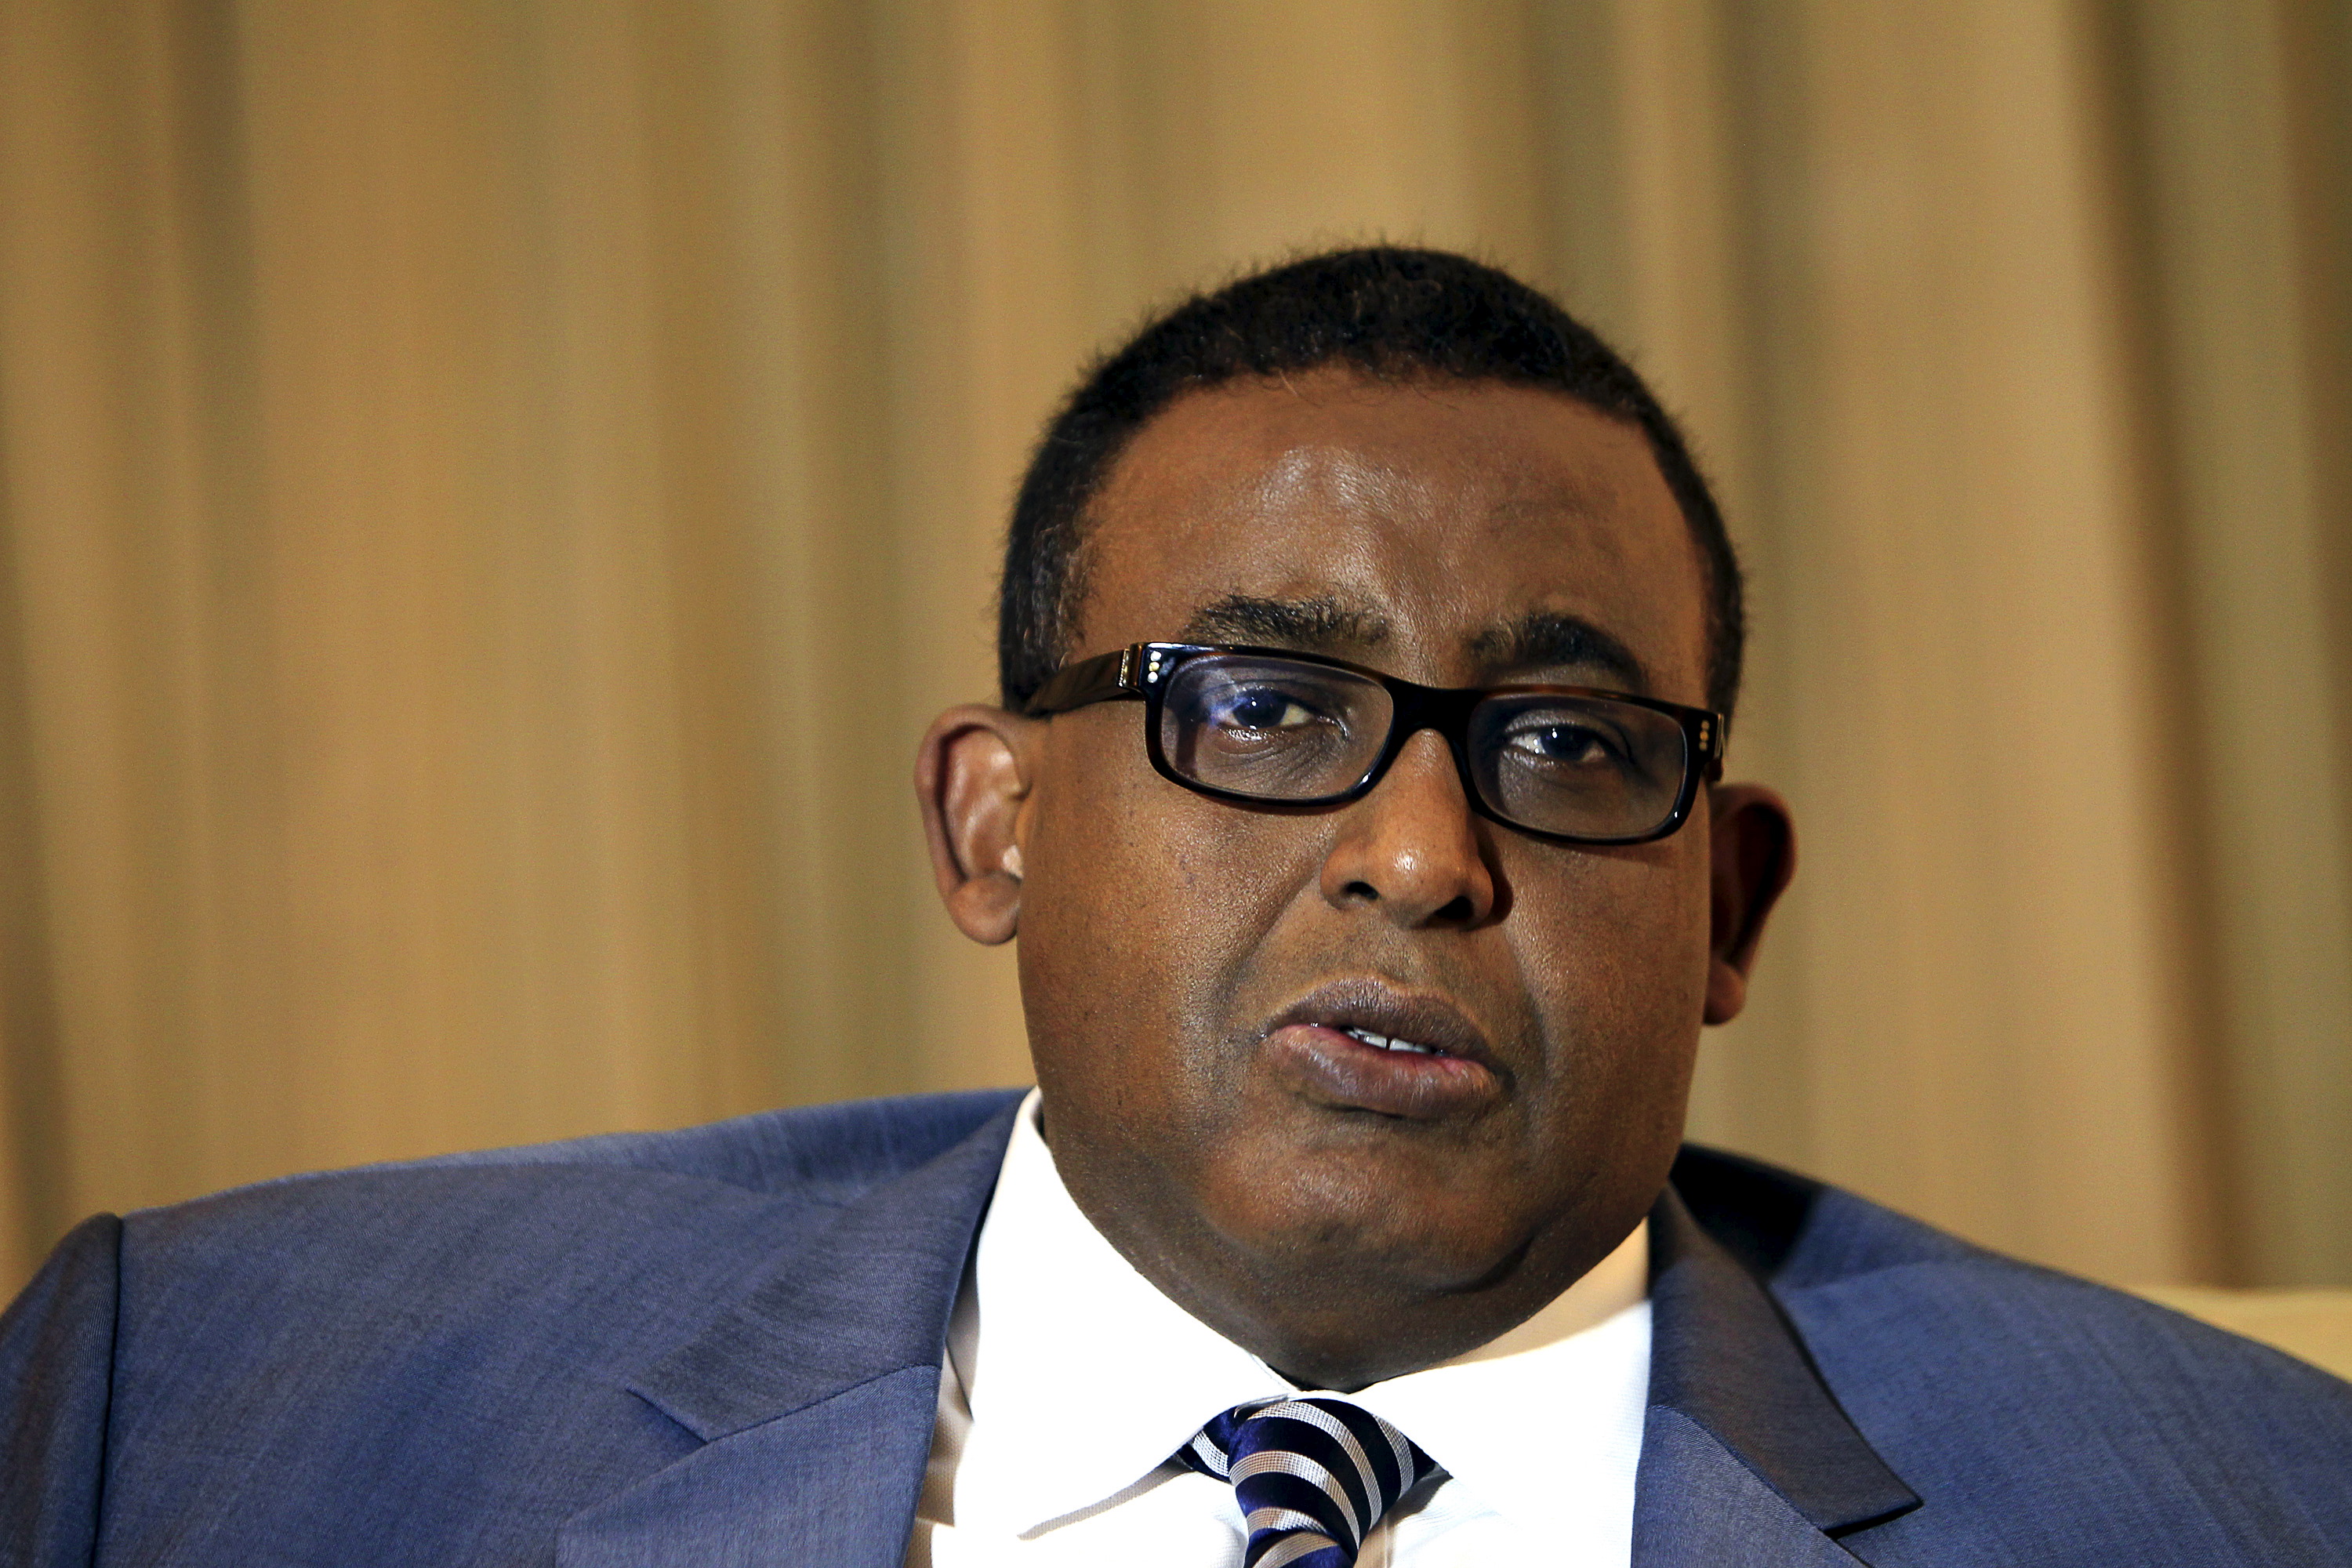 Somalia’s PM Sharmarke speaks during an interview with Reuters in Nairobi